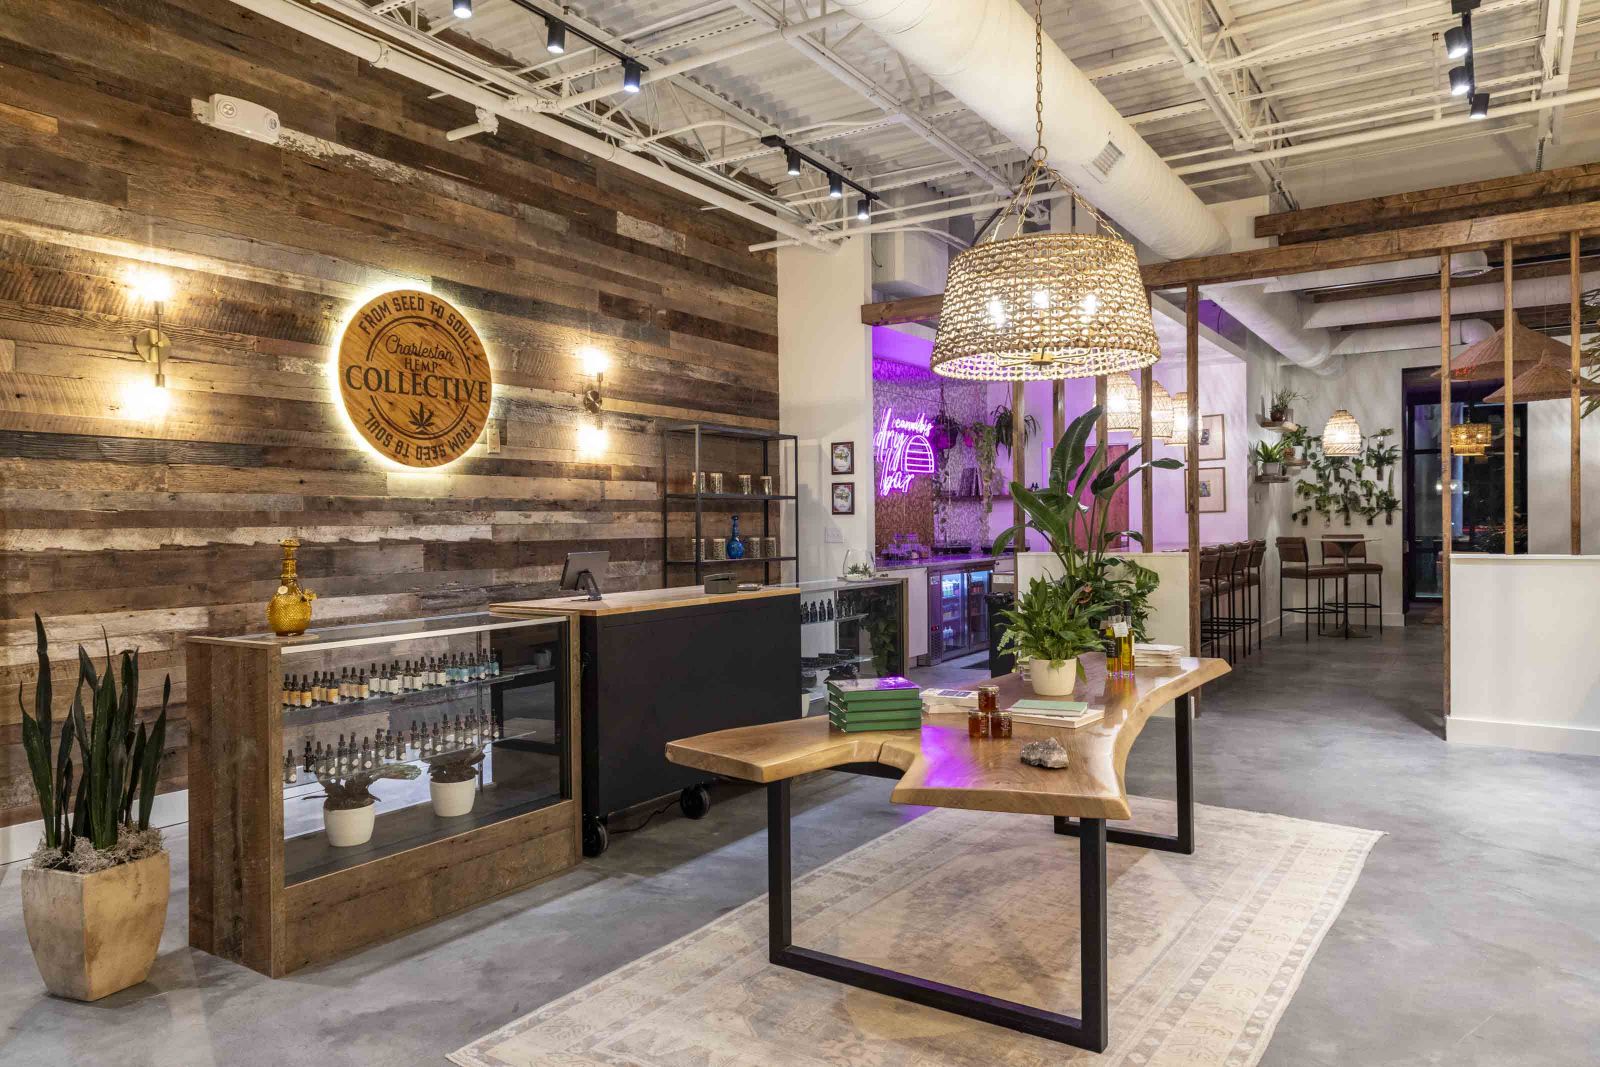 The dry bar is located inside the Charleston Hemp Collective. (Photo/Provided)